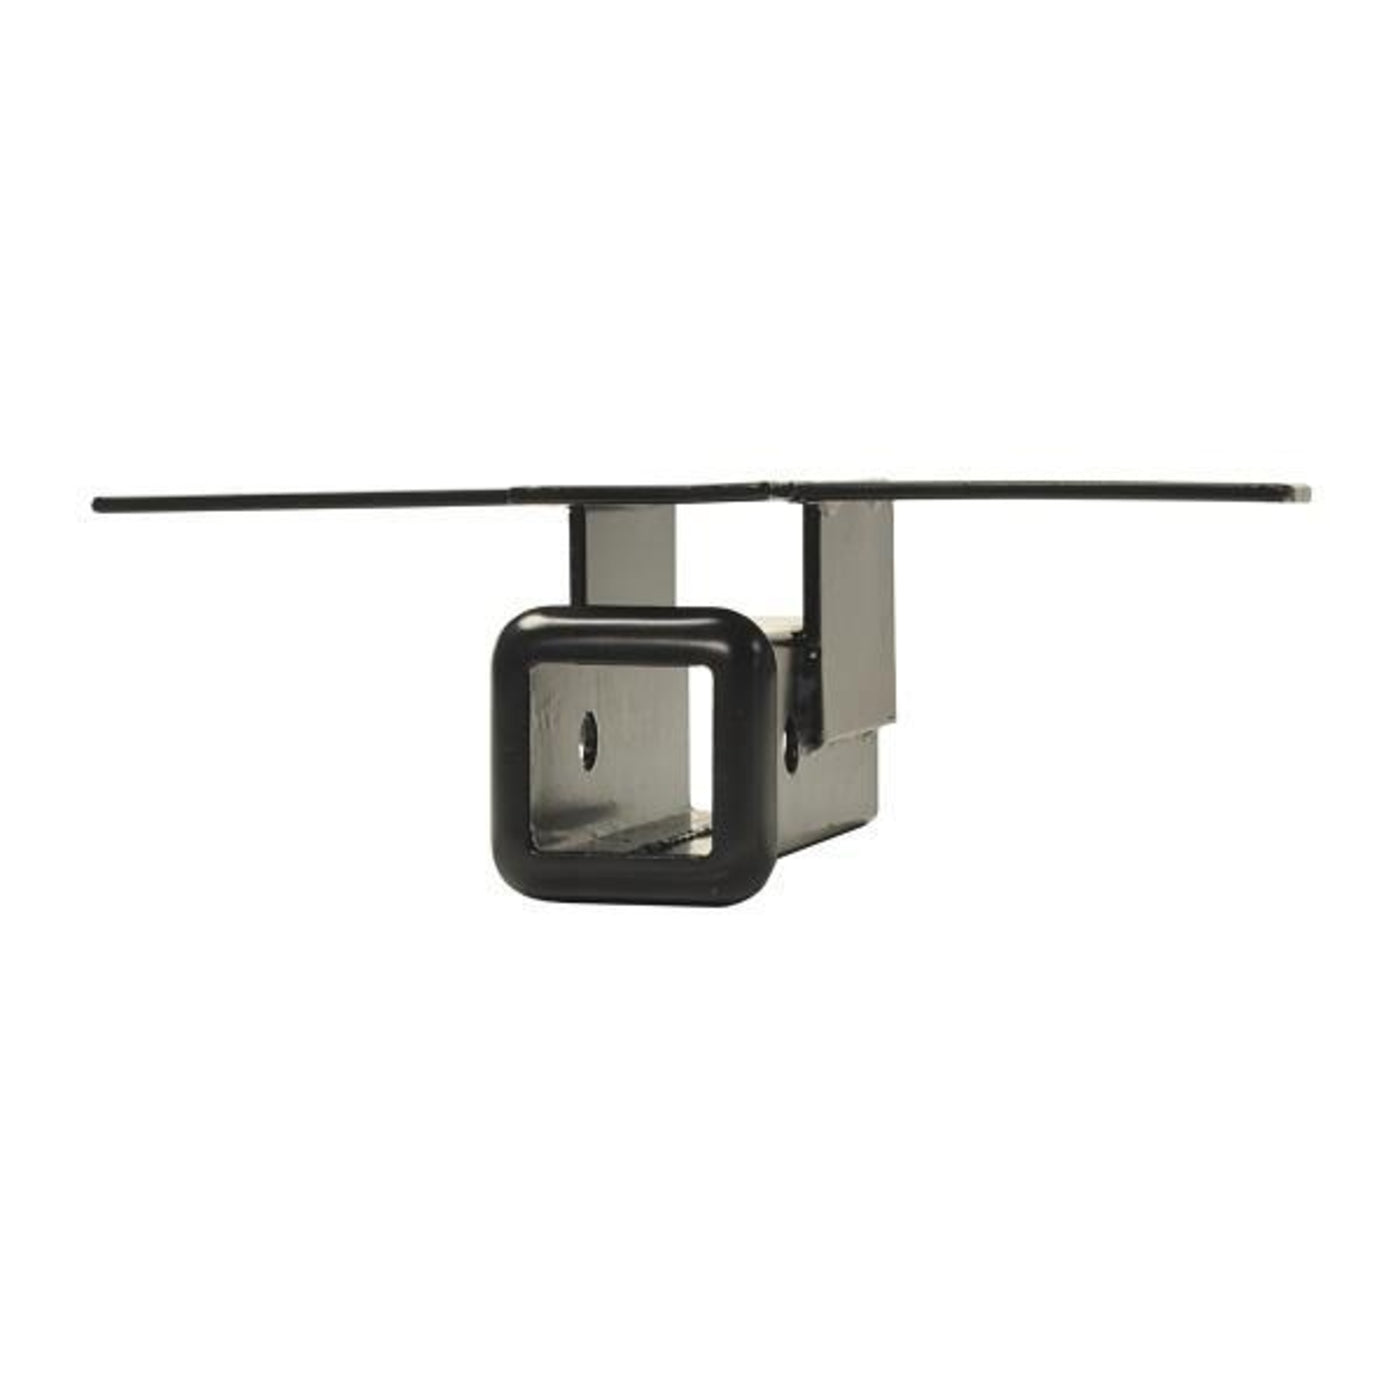 GTW¬Æ Trailer Hitch For E-Z-GO RVX (Years 2008-Up)